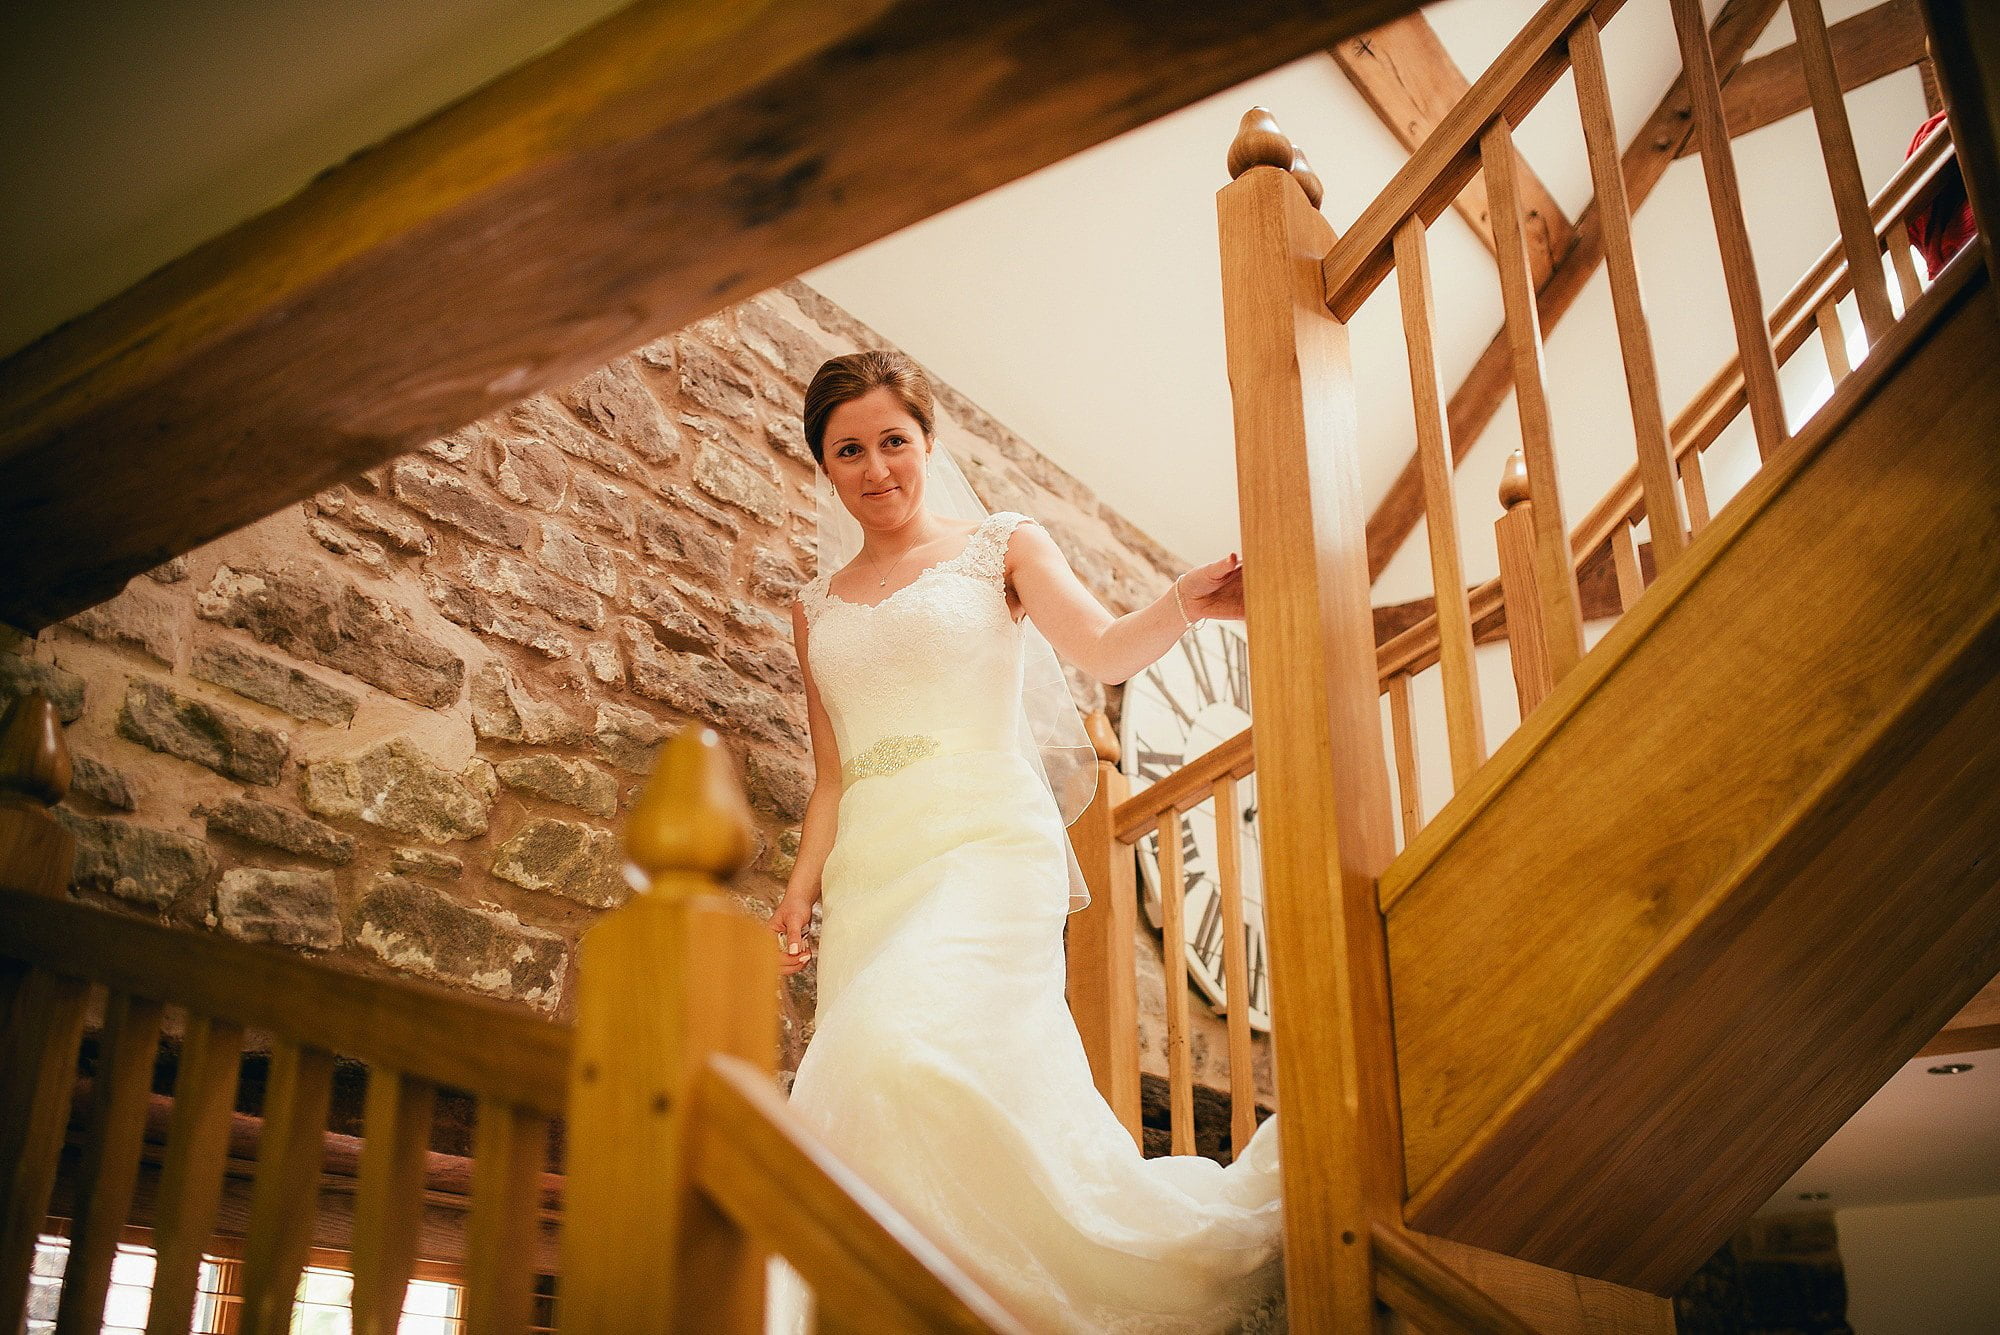 Bridal portrait at Flanesford Priory Herefordshire 